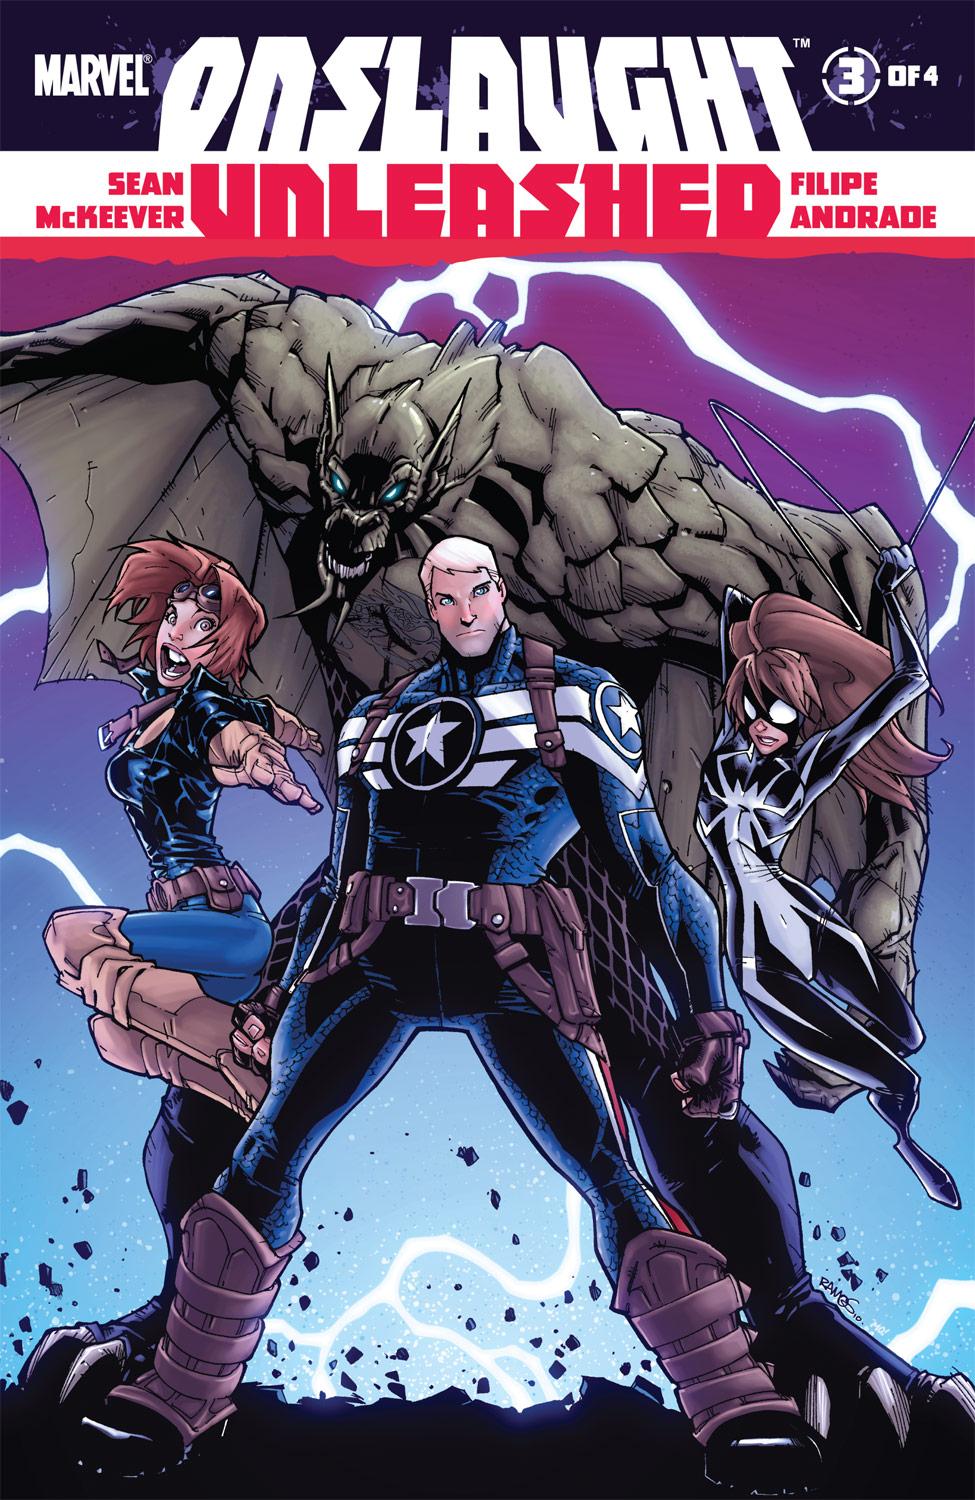 Onslaught Unleashed (2010) #3